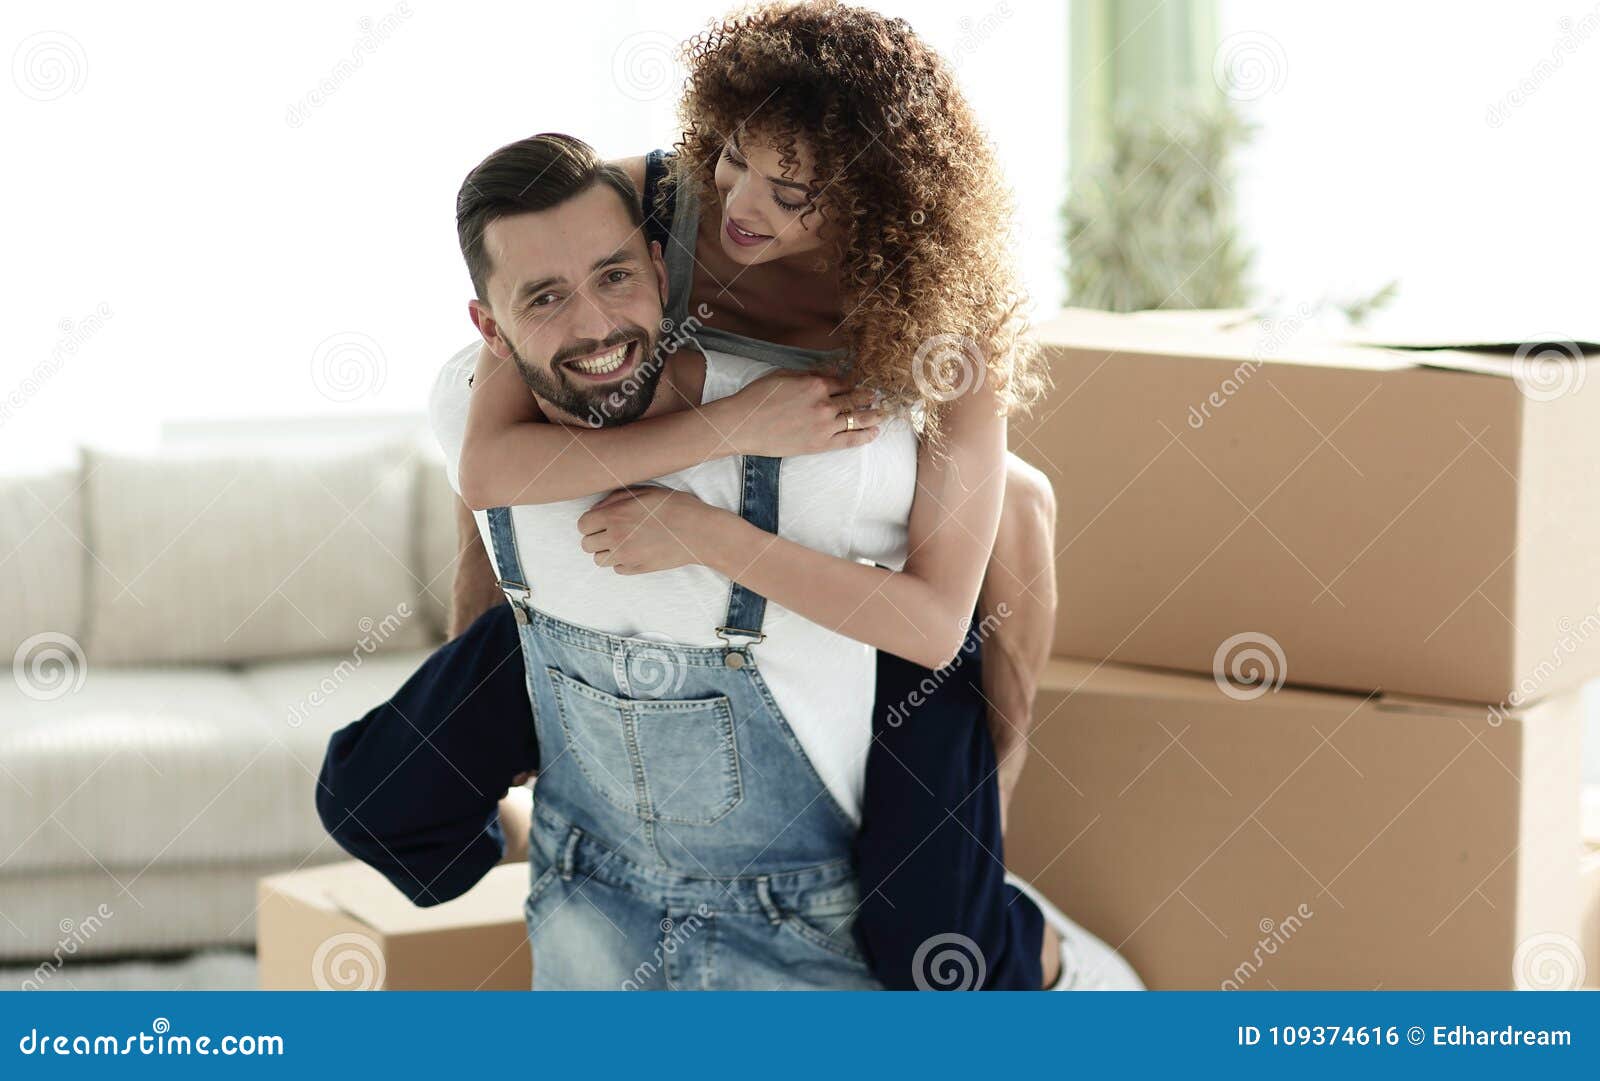 Wife Hugs Her Husband In A New Apartment Stock Photo Image Of H